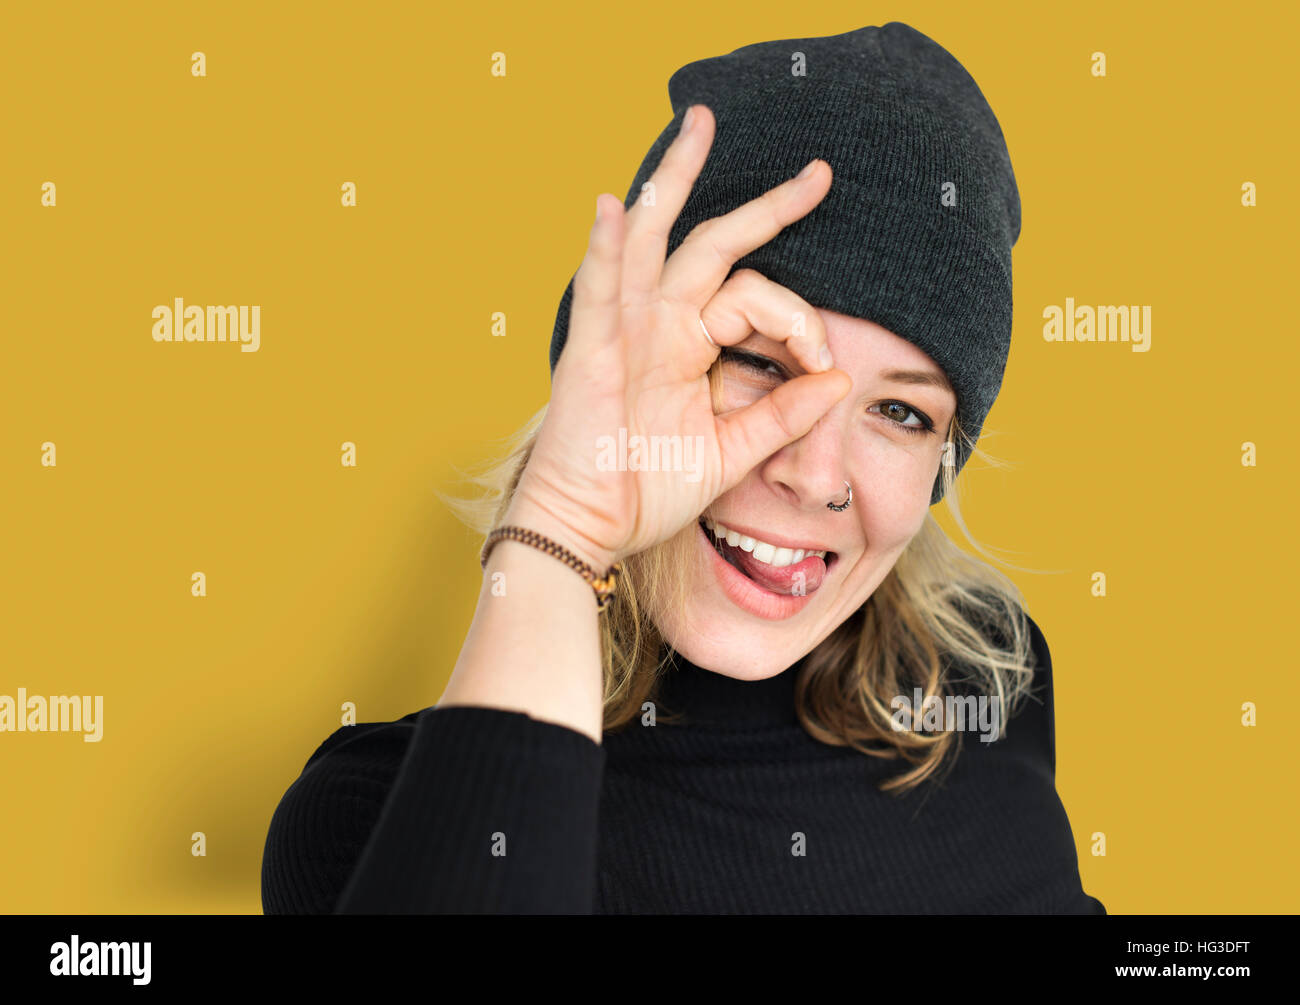 Woman Smiling Happiness Playful Portrait Concept Stock Photo